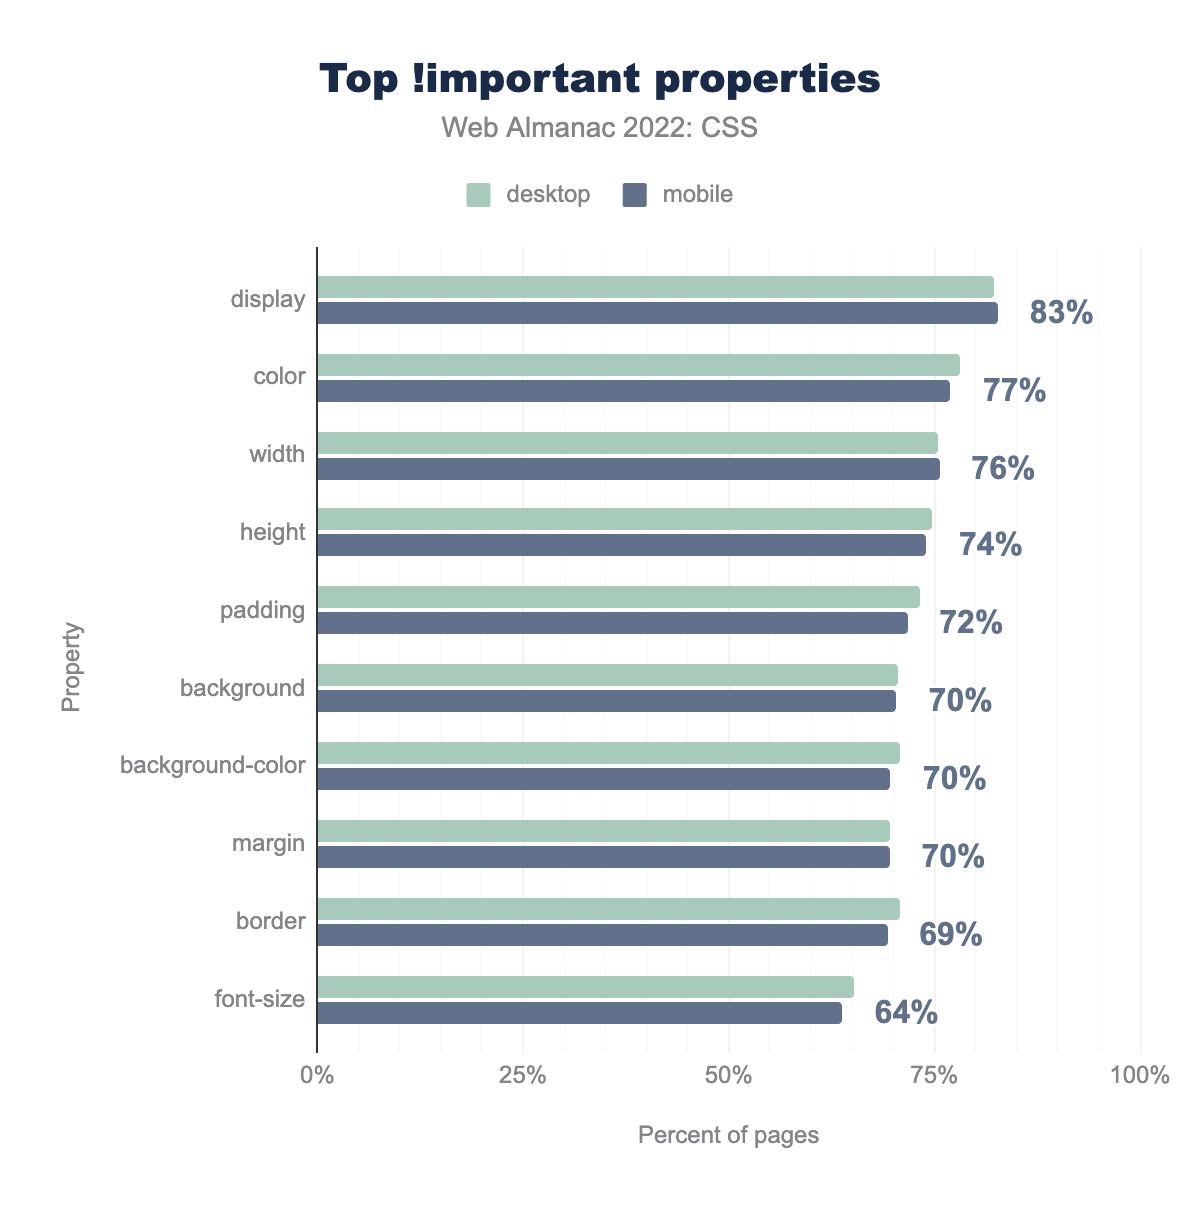 The top properties that !important is applied to by percent of pages.